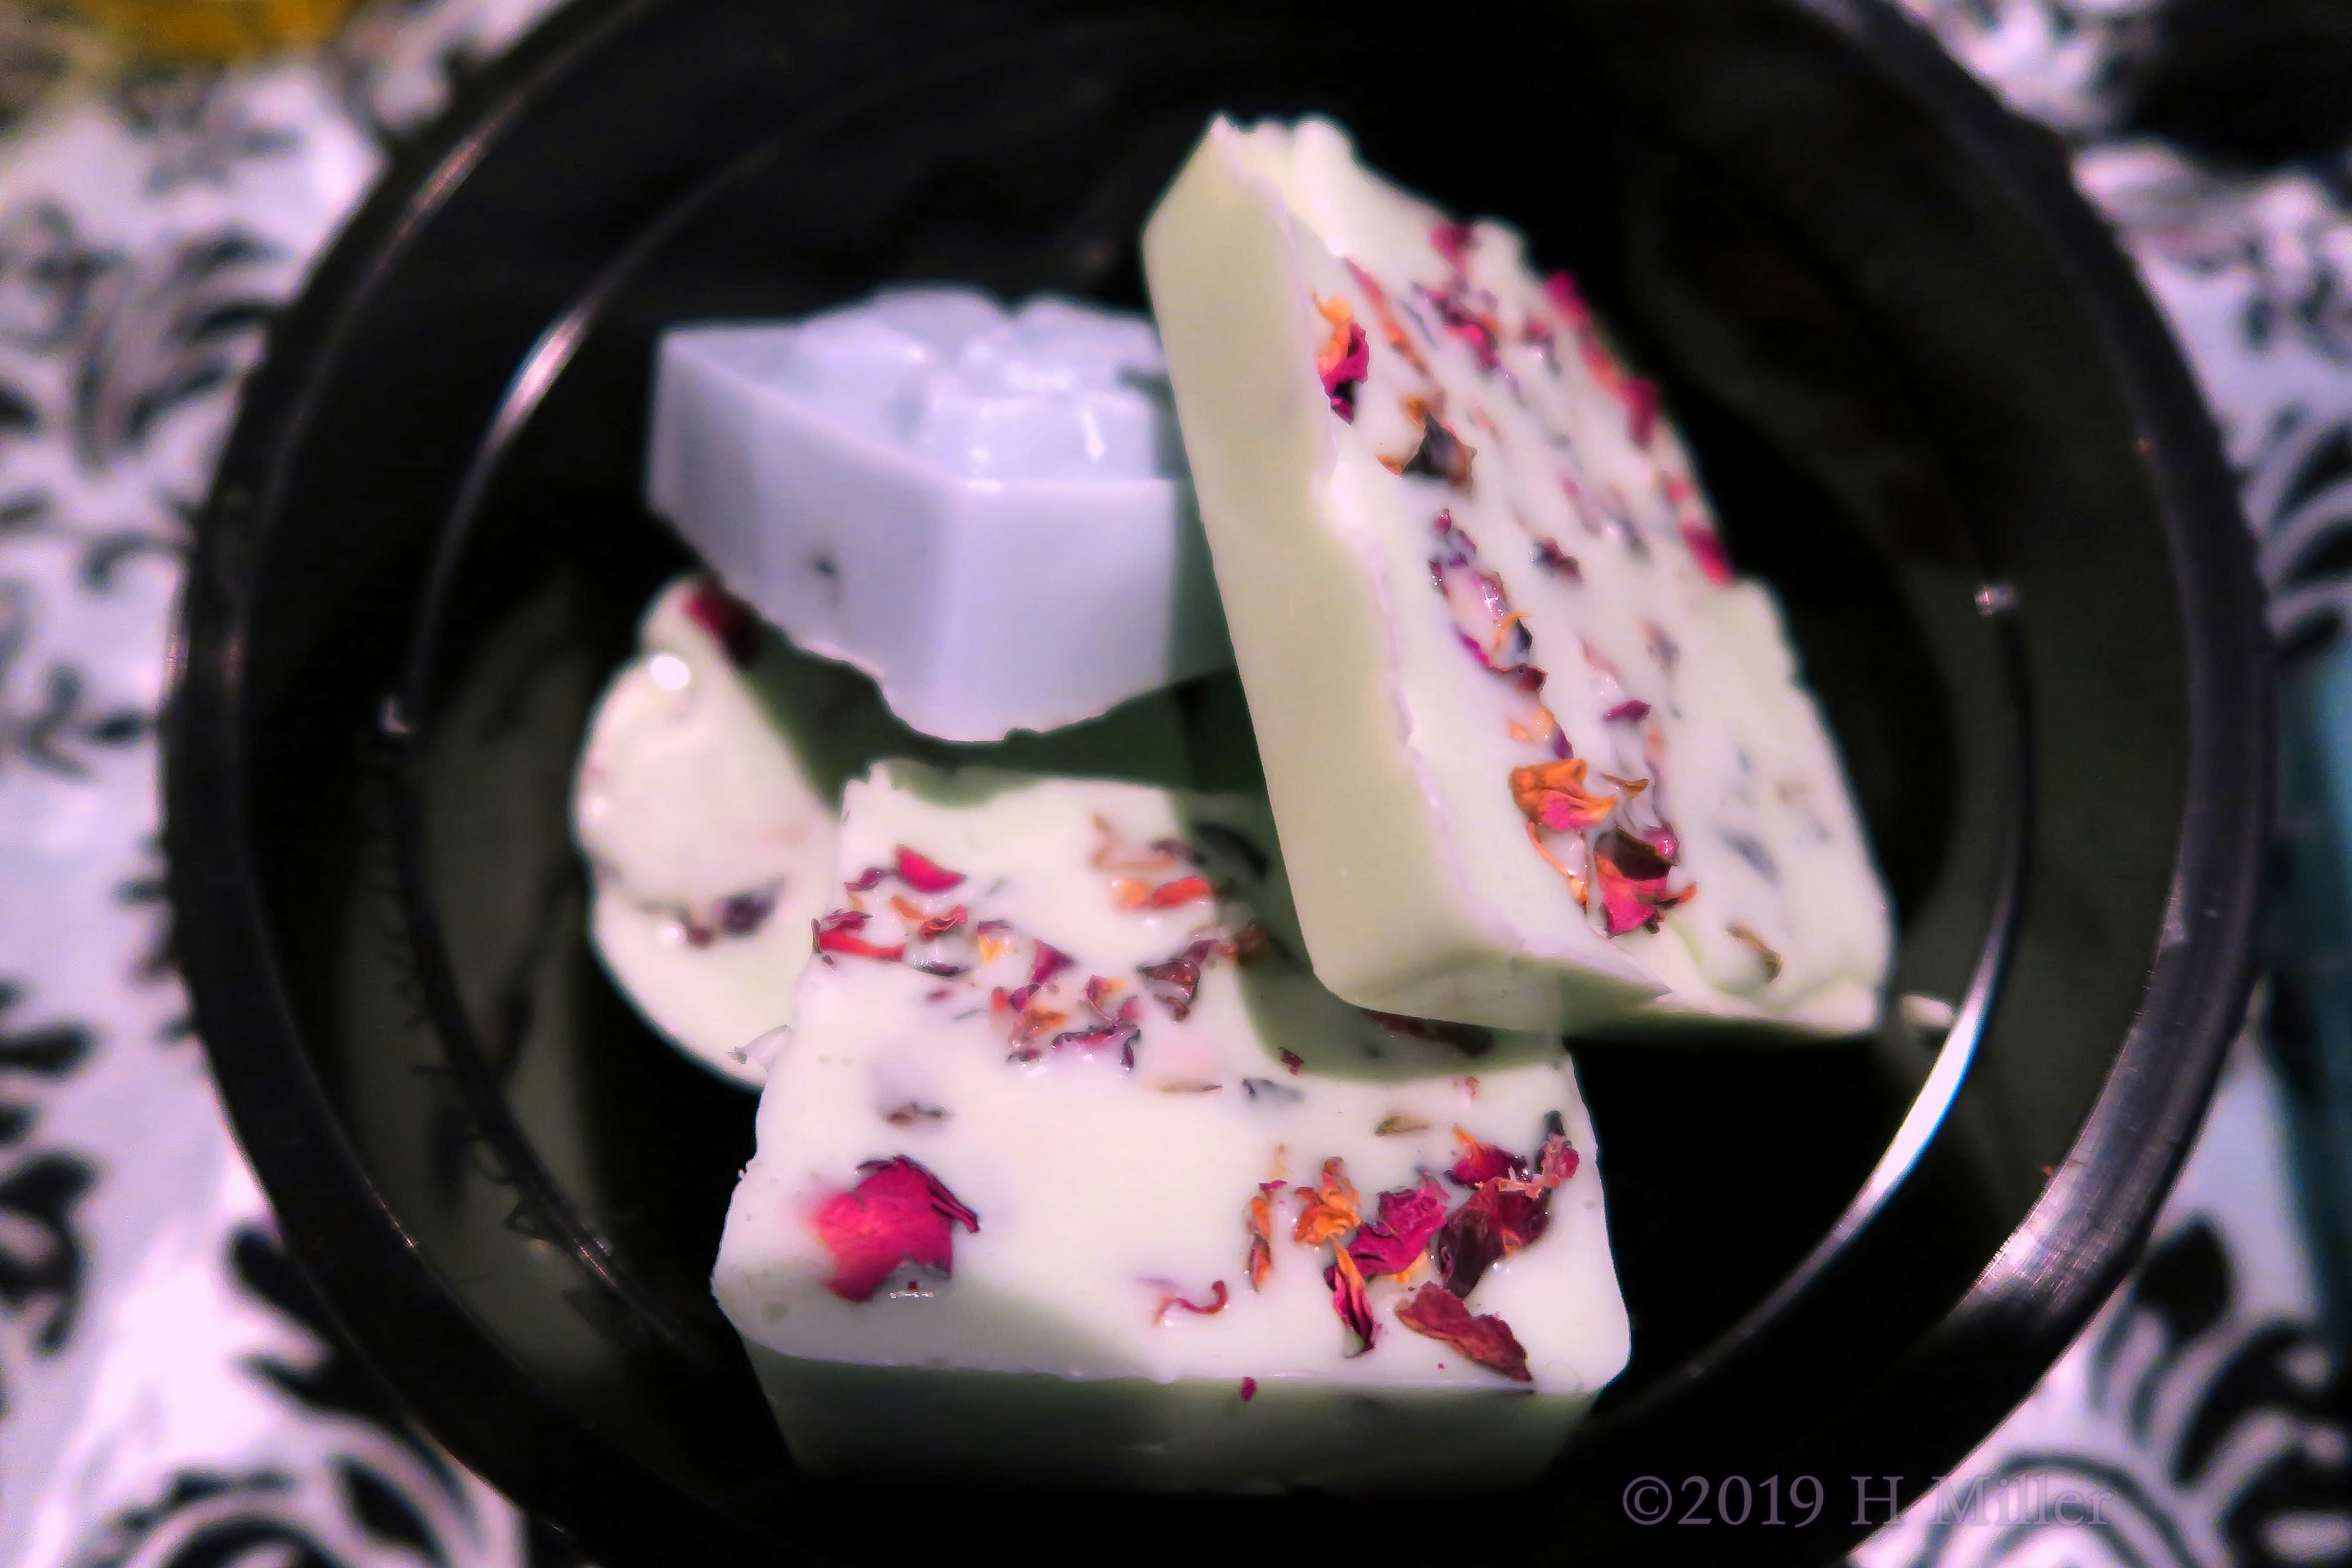 Soaps And Suds! Bath Soaps Kids Crafts For Spa Party Guests! 4